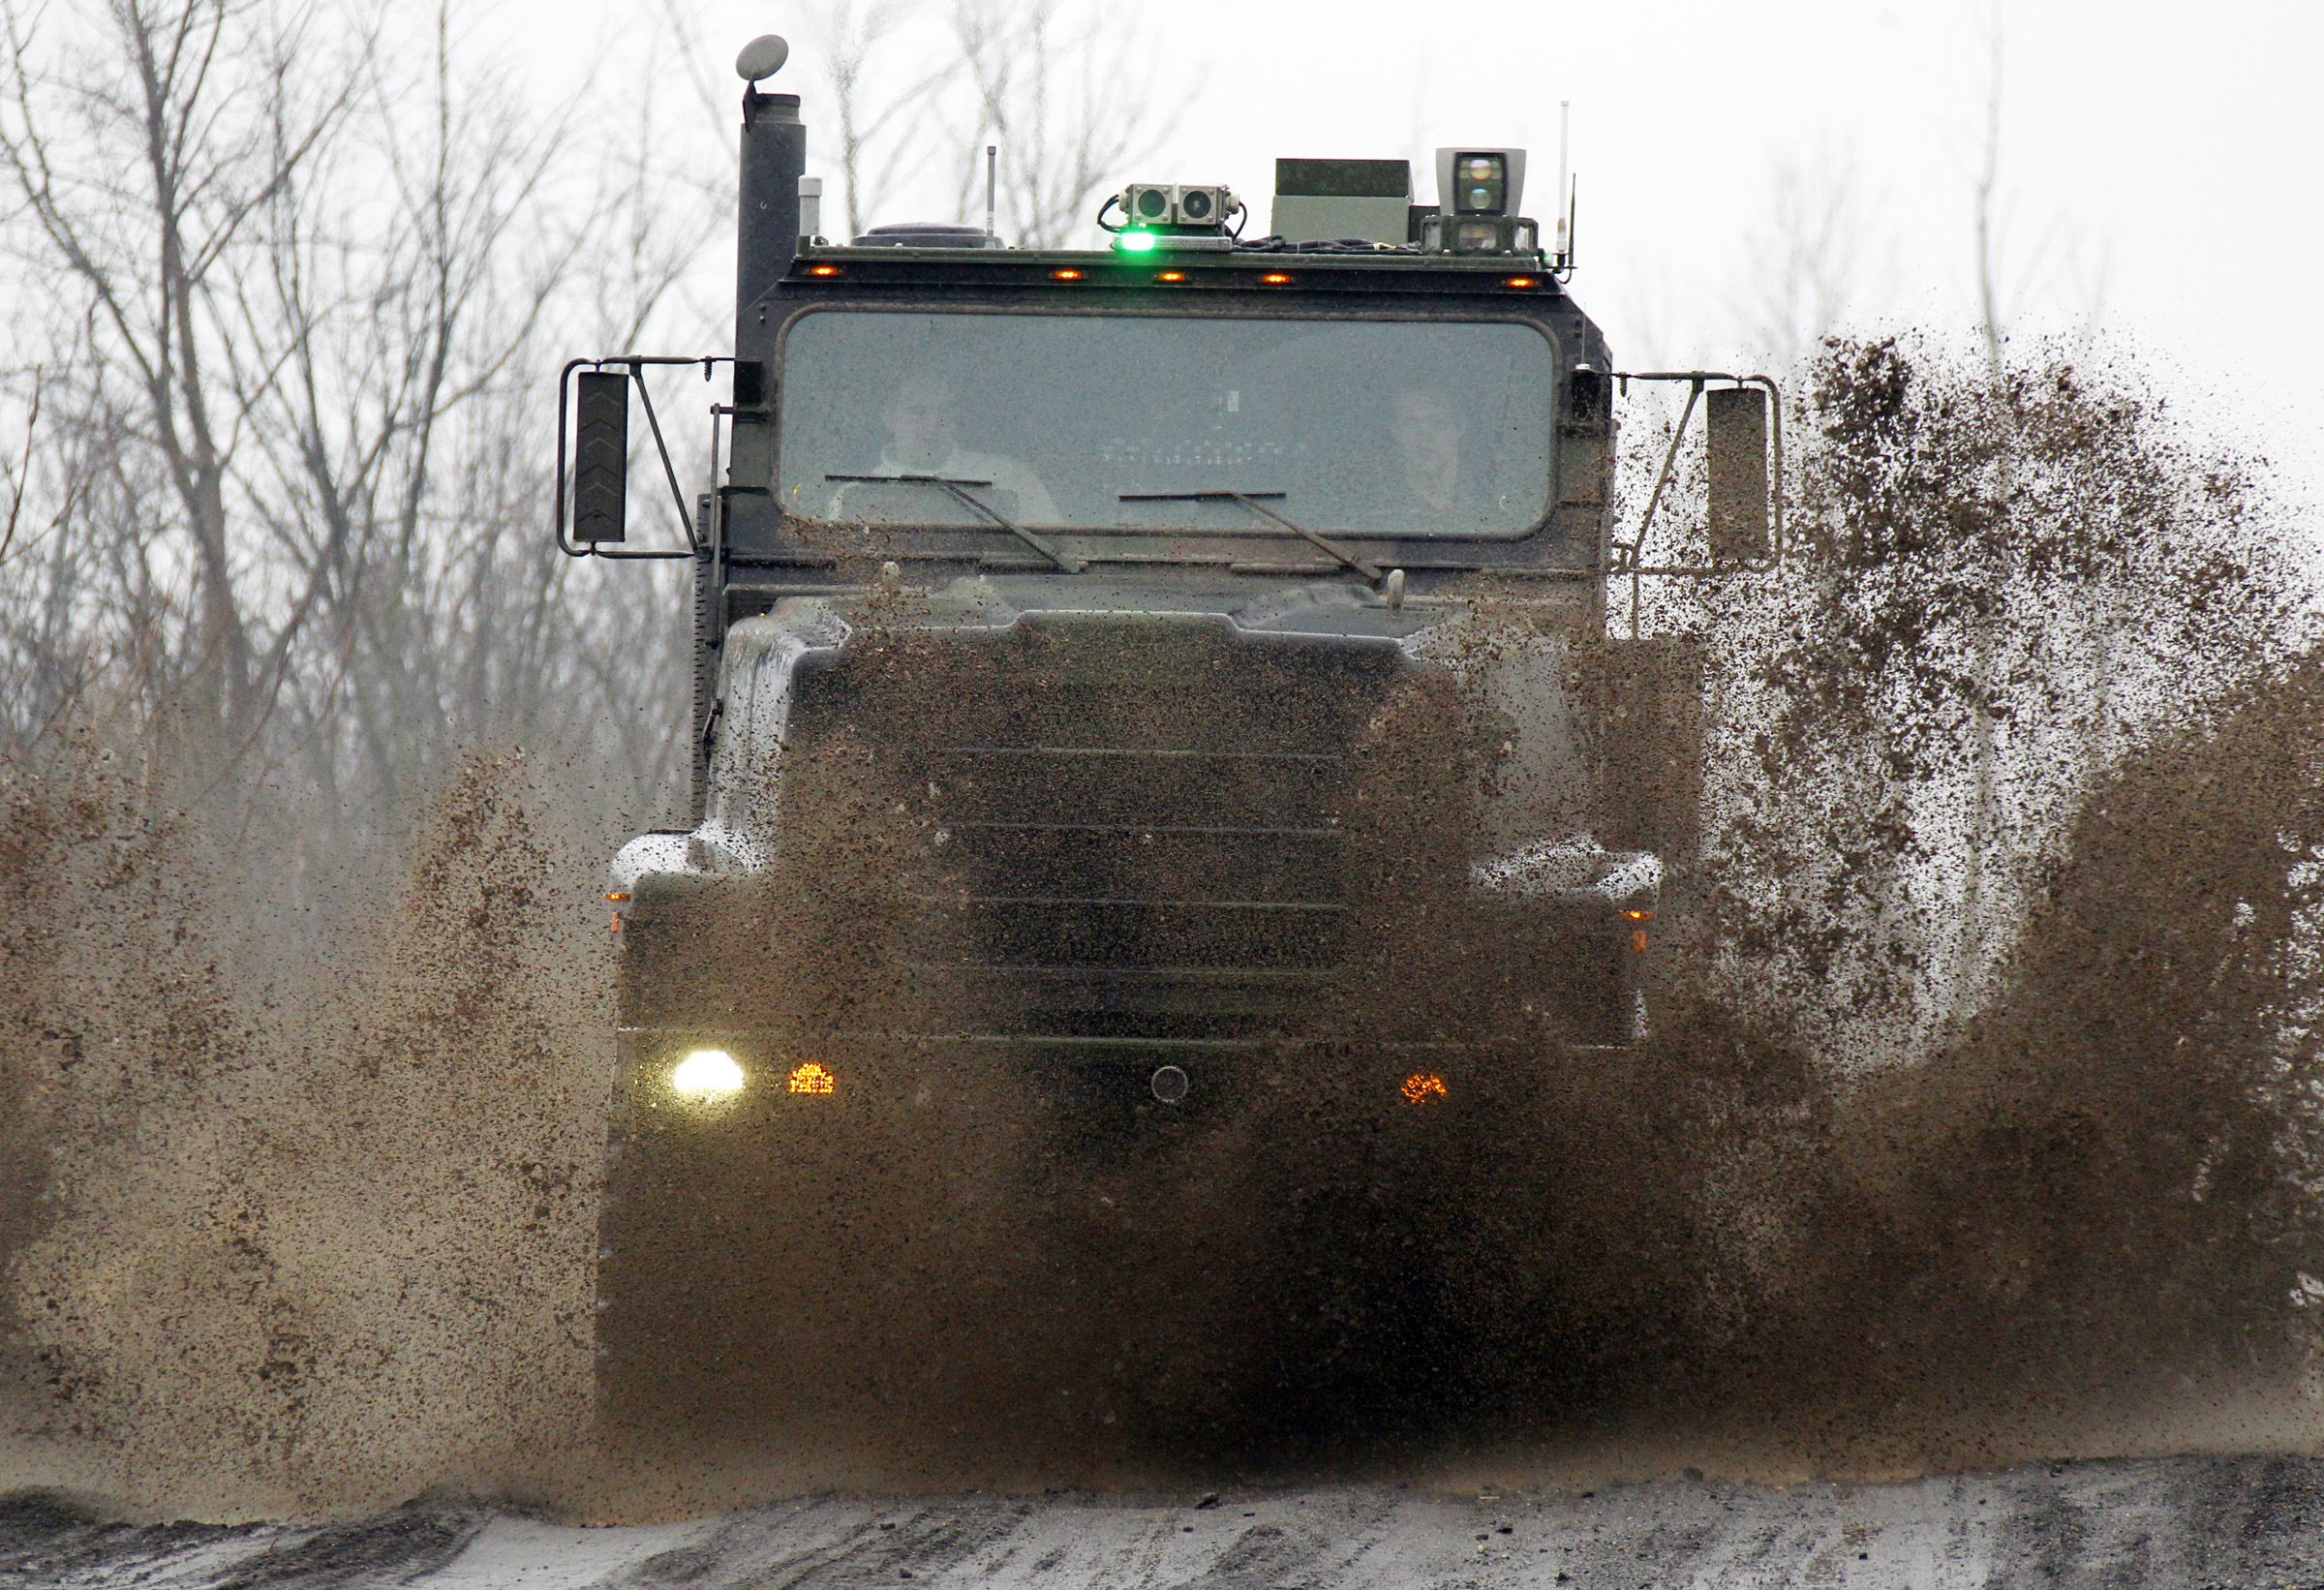 An Oshkosh truck using the TerraMax autonomous driving system drives along a mud-soaked test course outside of Pittsburgh